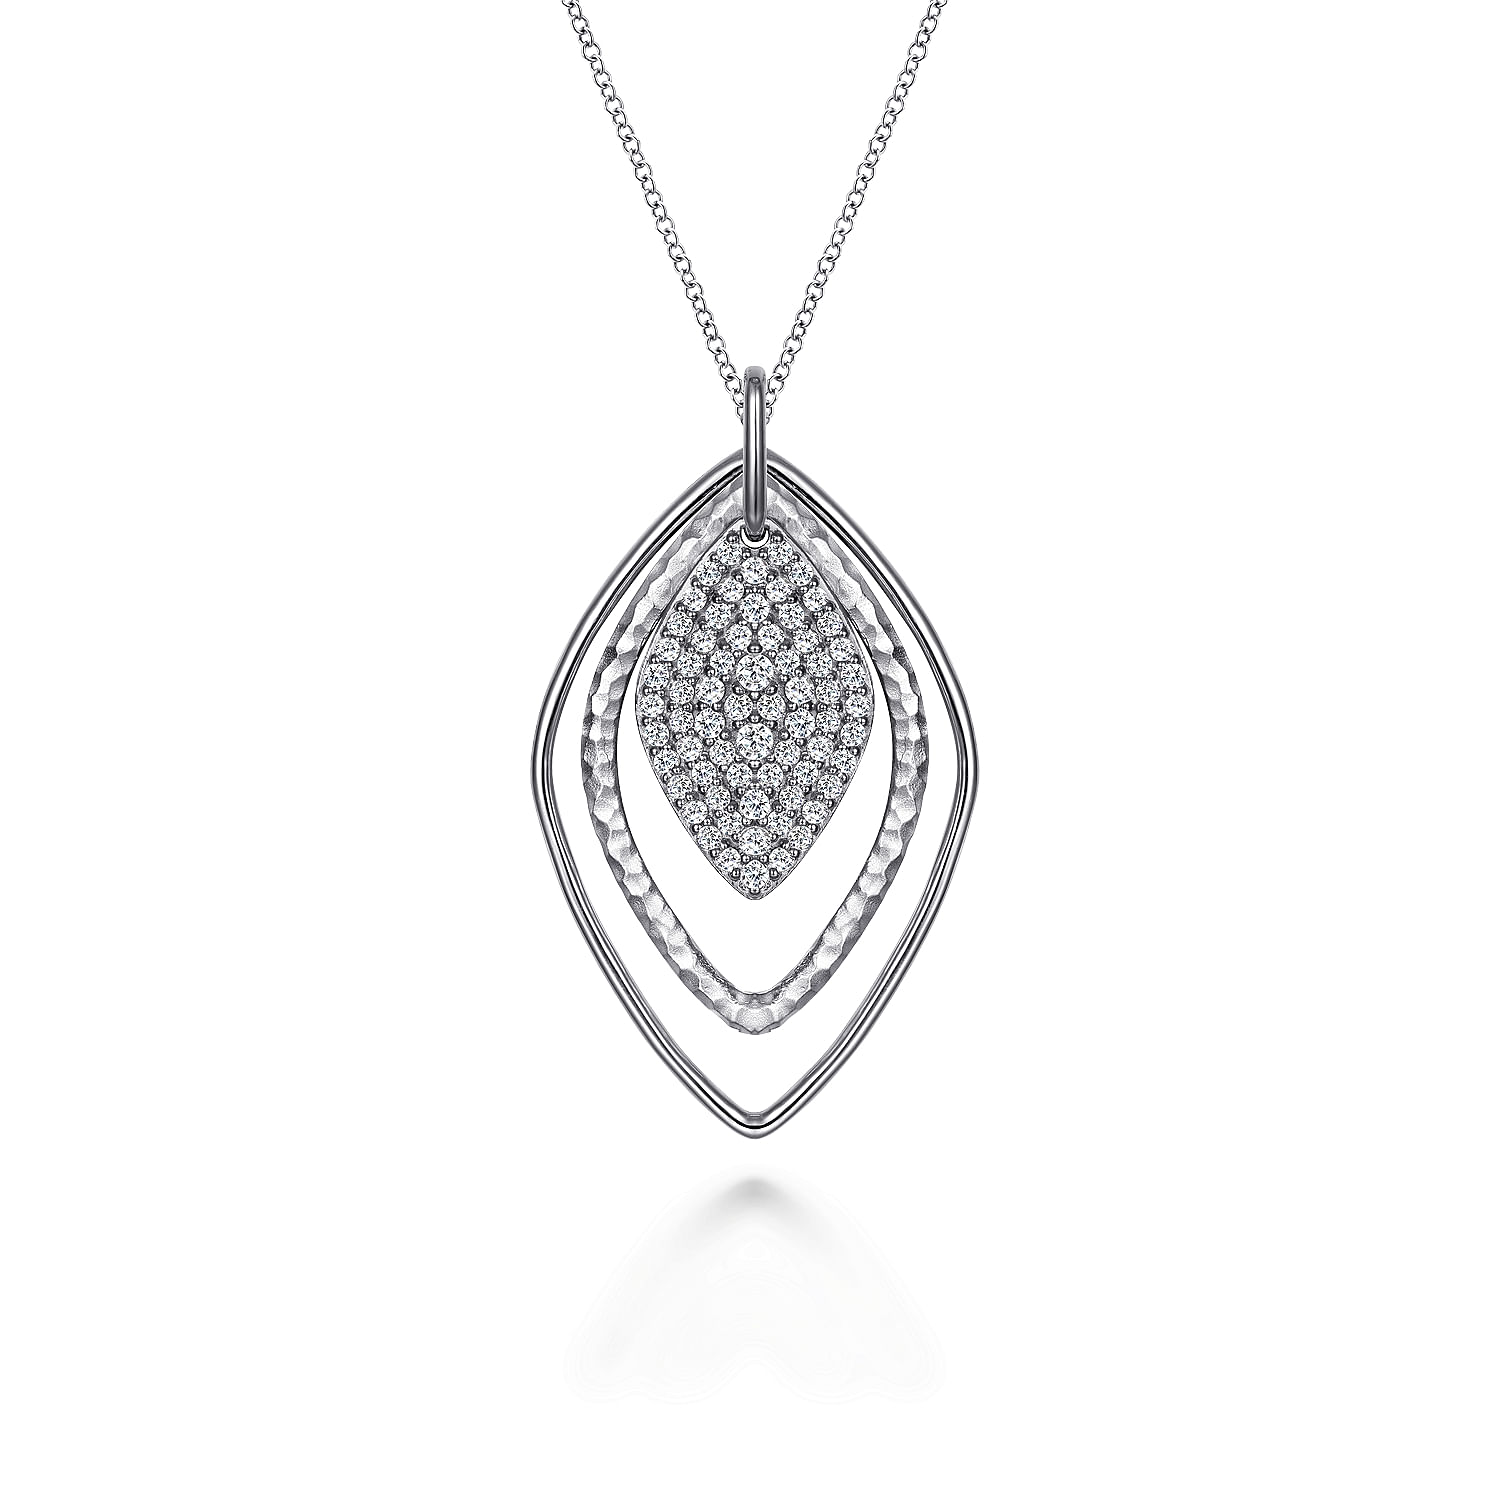 Gabriel - 925 Sterling Silver Layered Rhombus Pendant Necklace with White Sapphire Pavé Drop